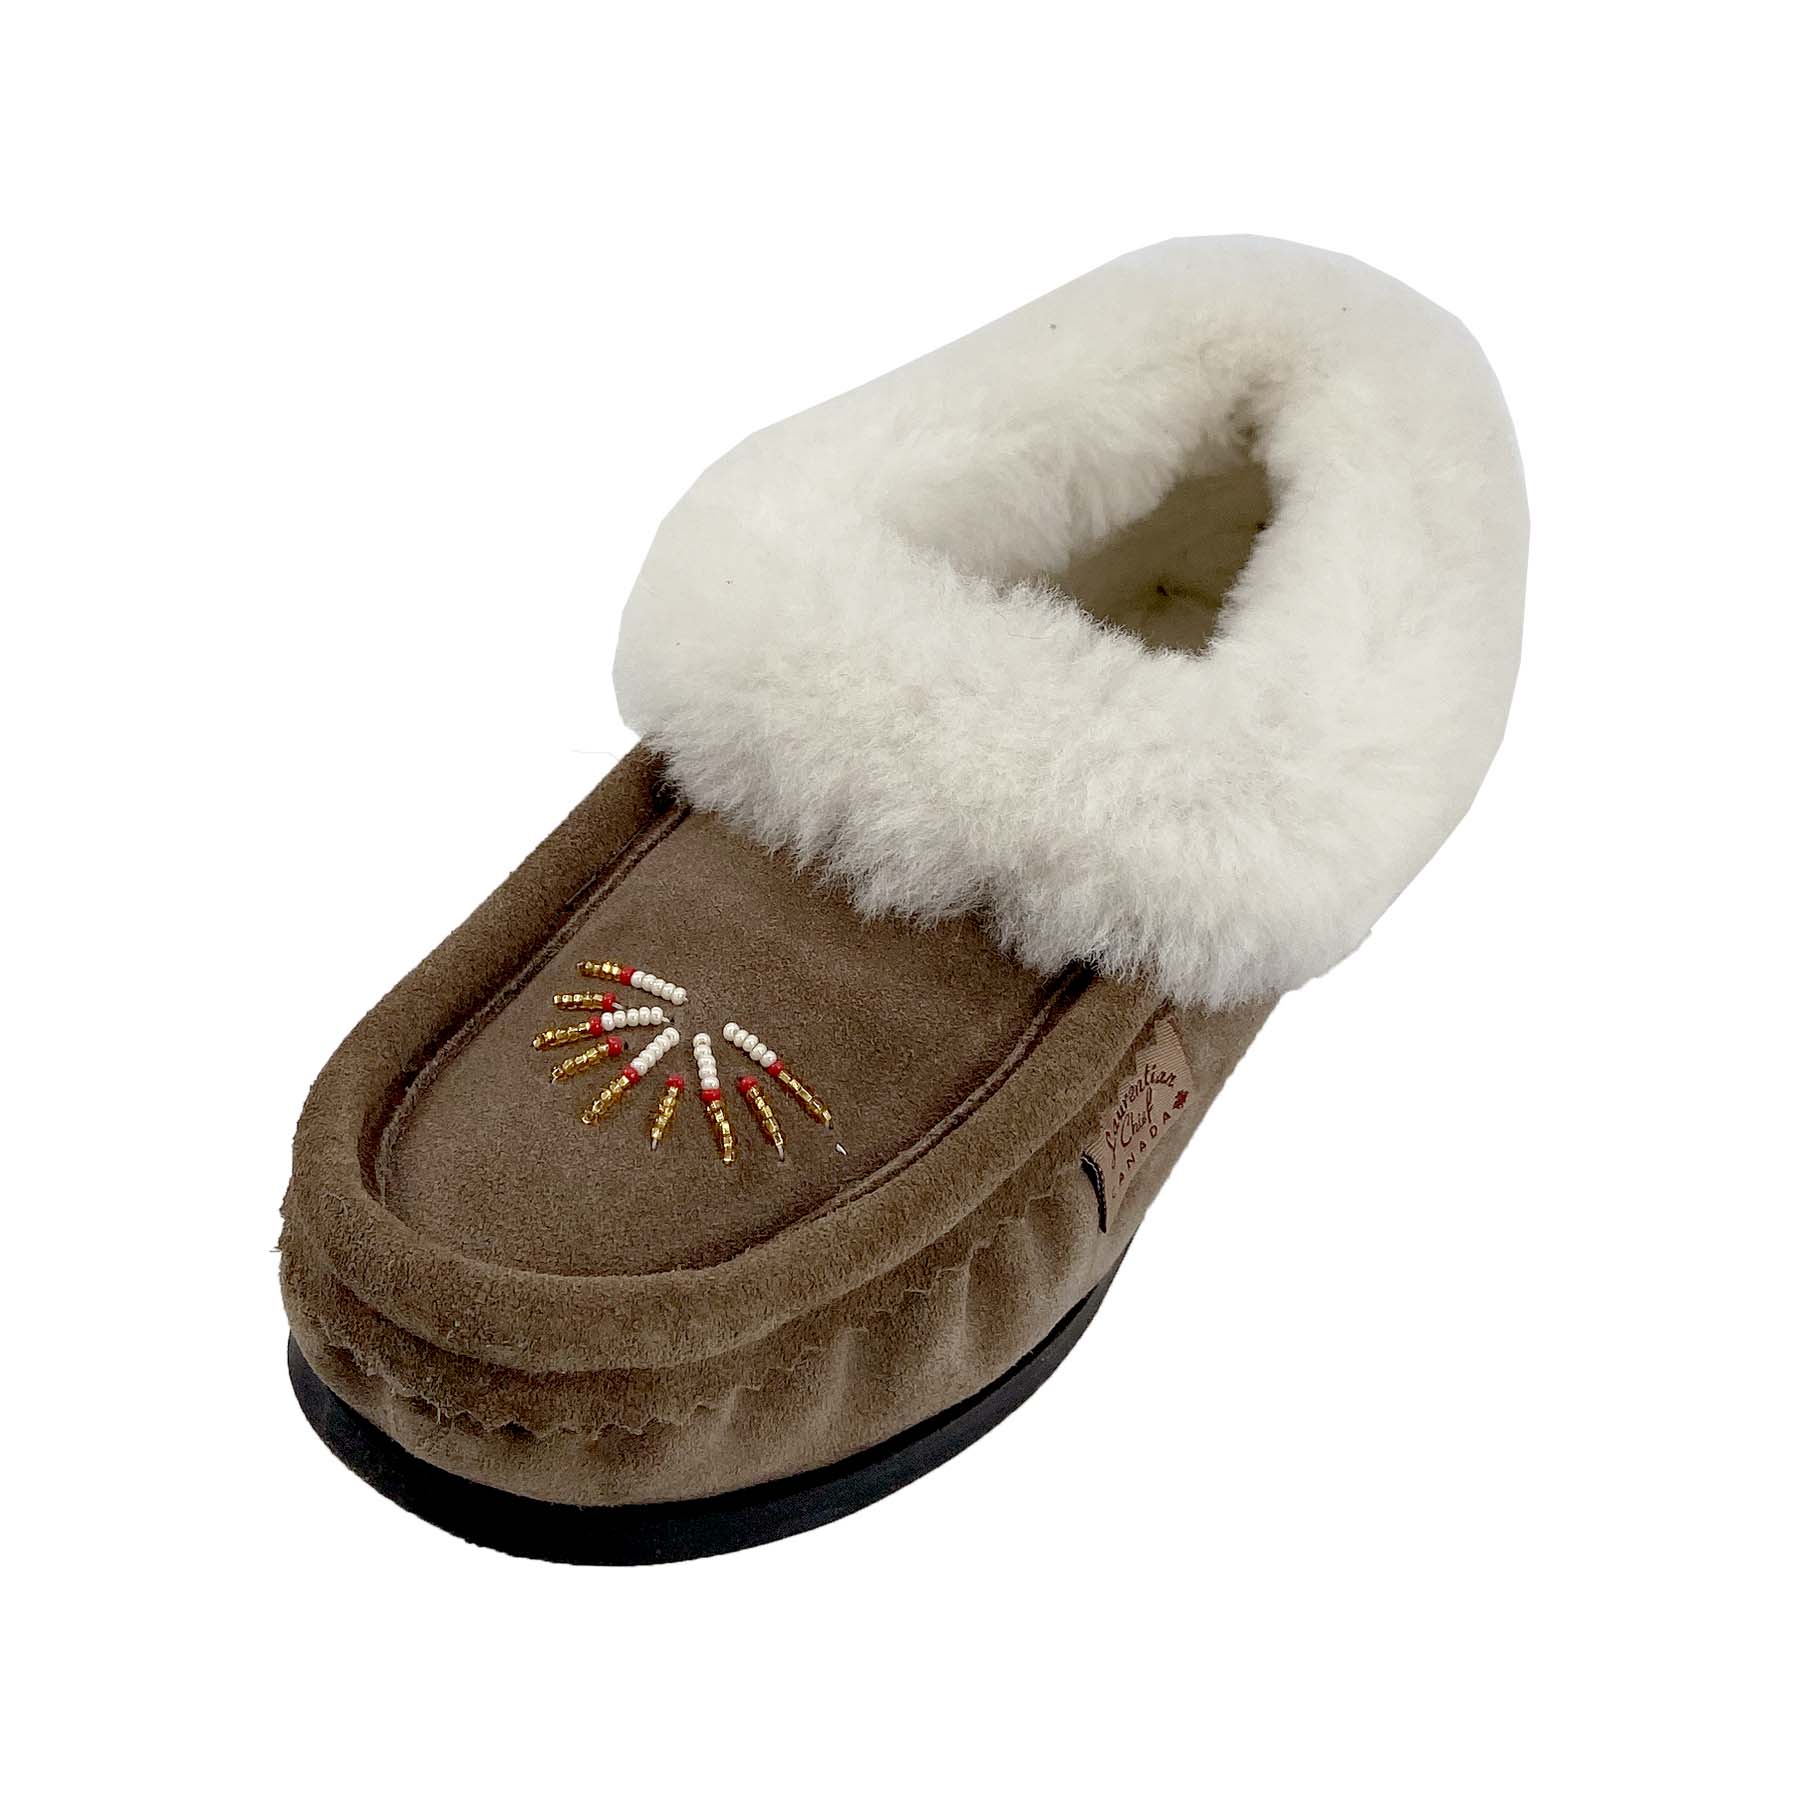 Buy Women's Hard Crepe Sole Sheepskin Moccasin Made In Canada – Leather-Moccasins